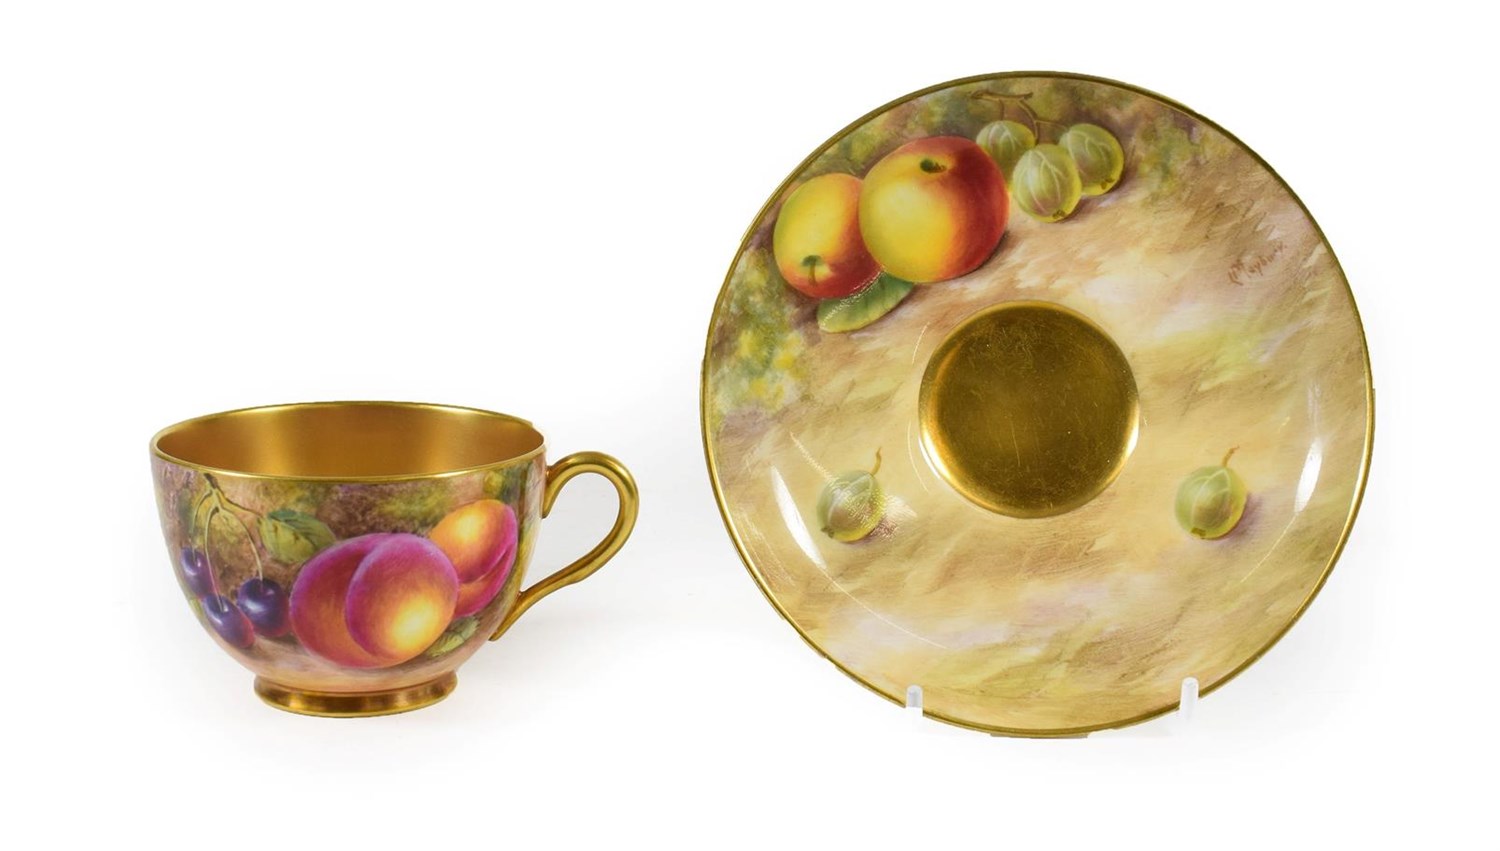 Lot 32 - A Royal Worcester Porcelain Teacup and Saucer, 1952/53, painted with still lives of fruit on a...